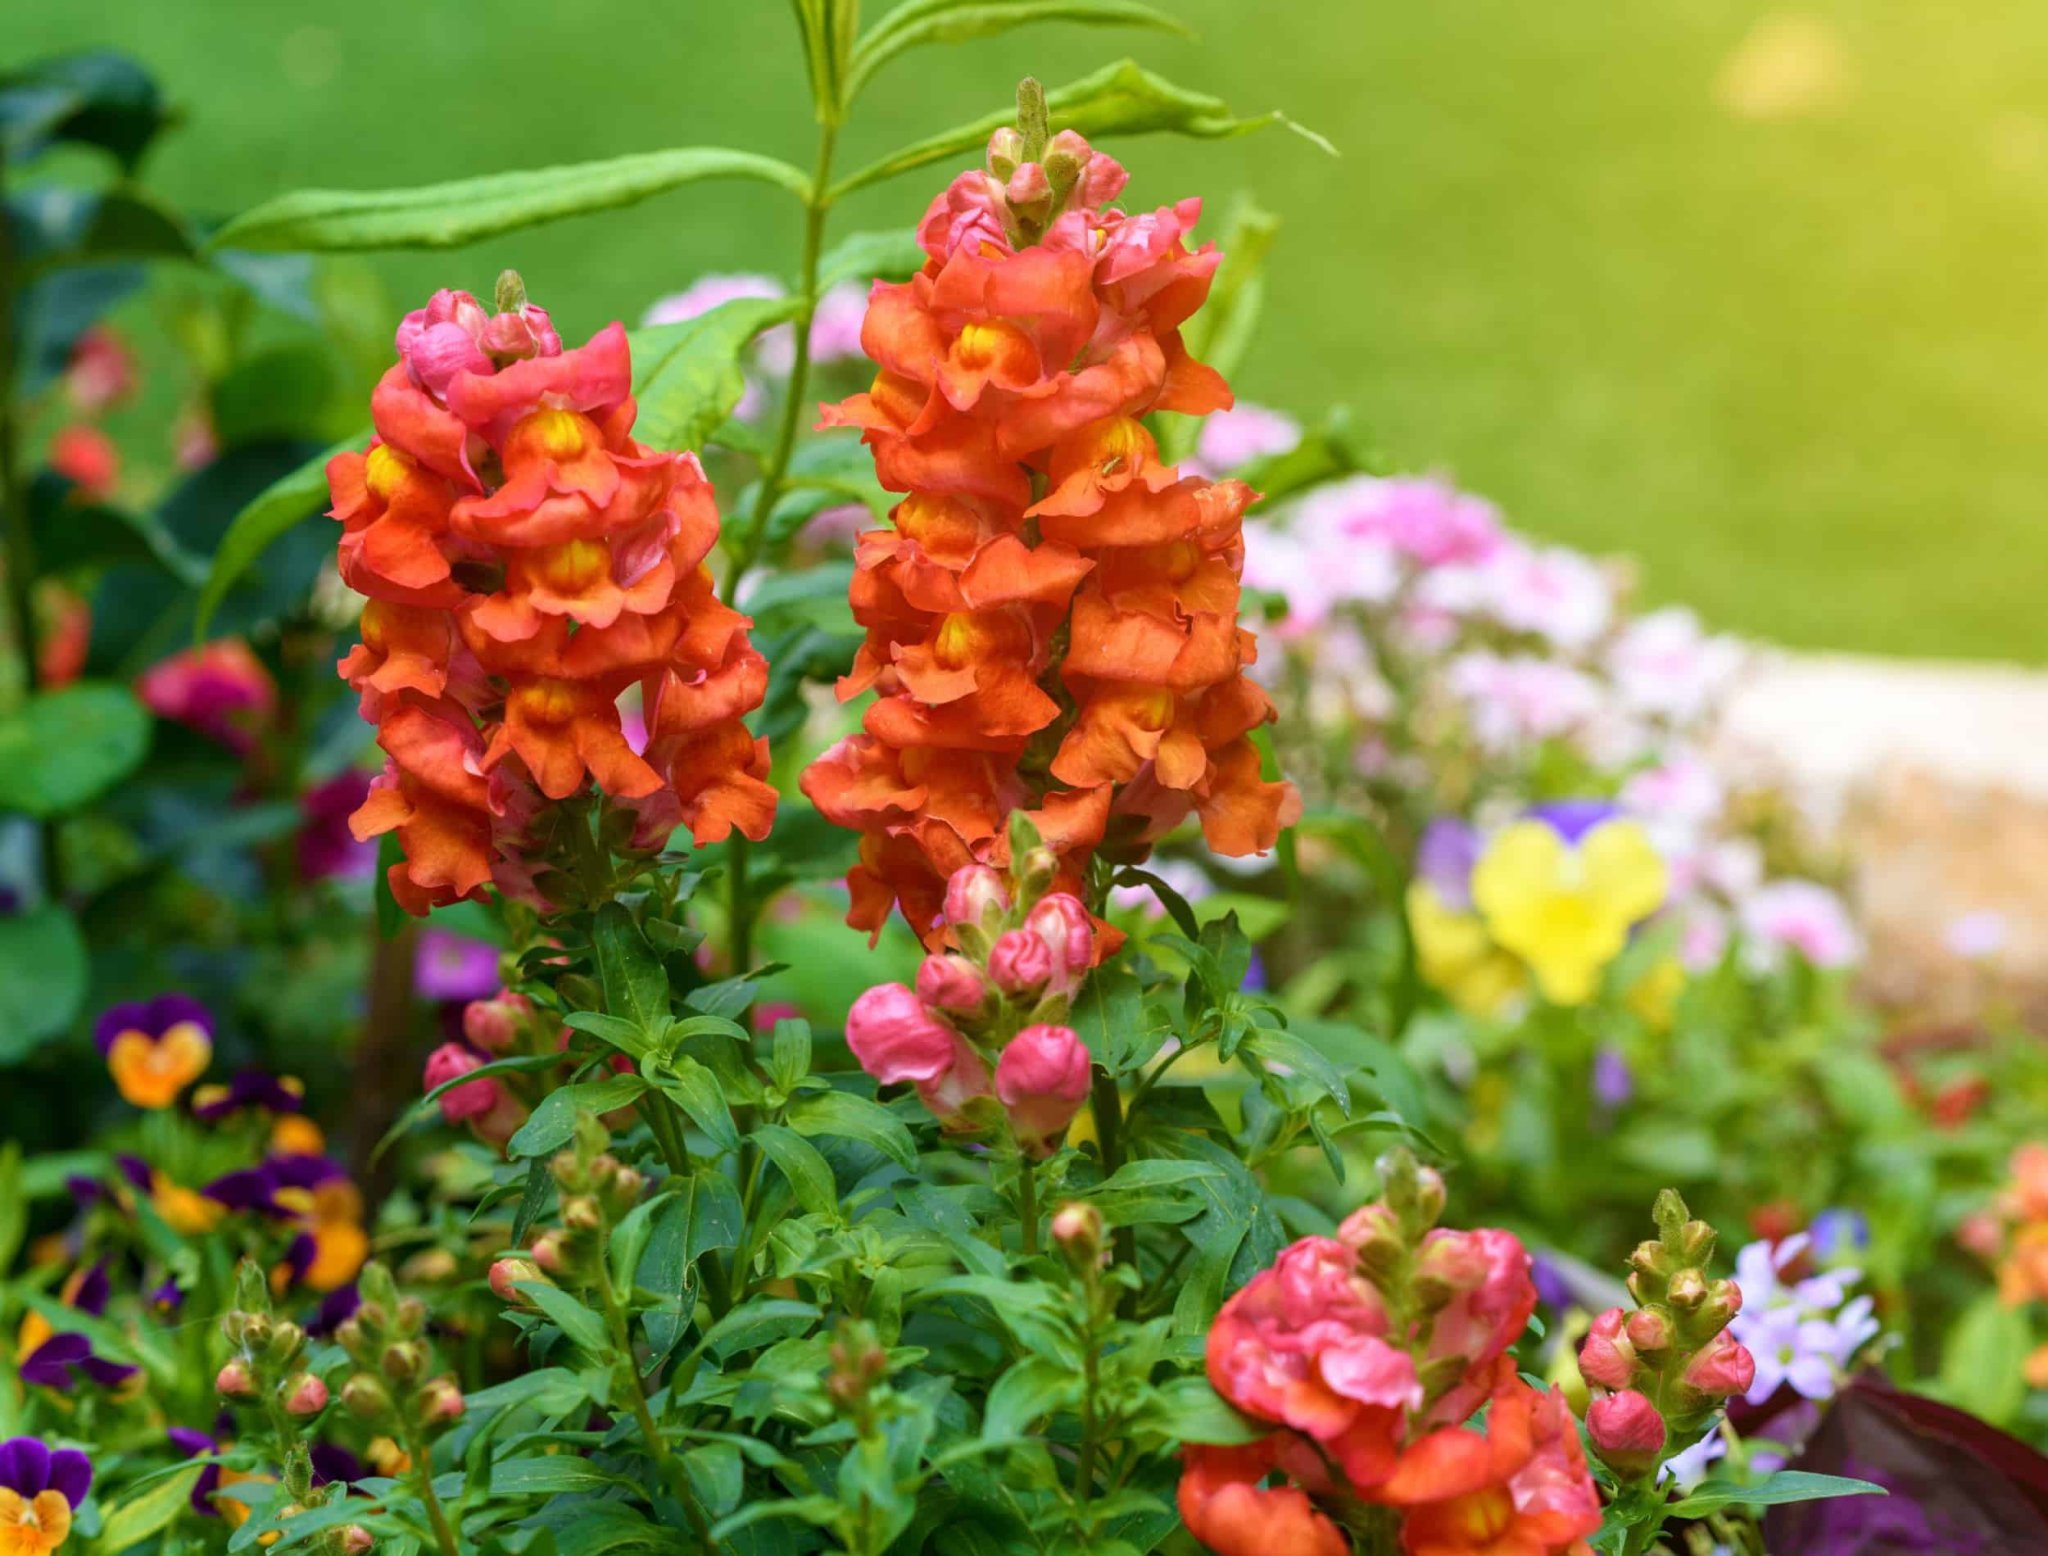 7 REASONS TO ADD SNAPDRAGONS TO YOUR GARDEN